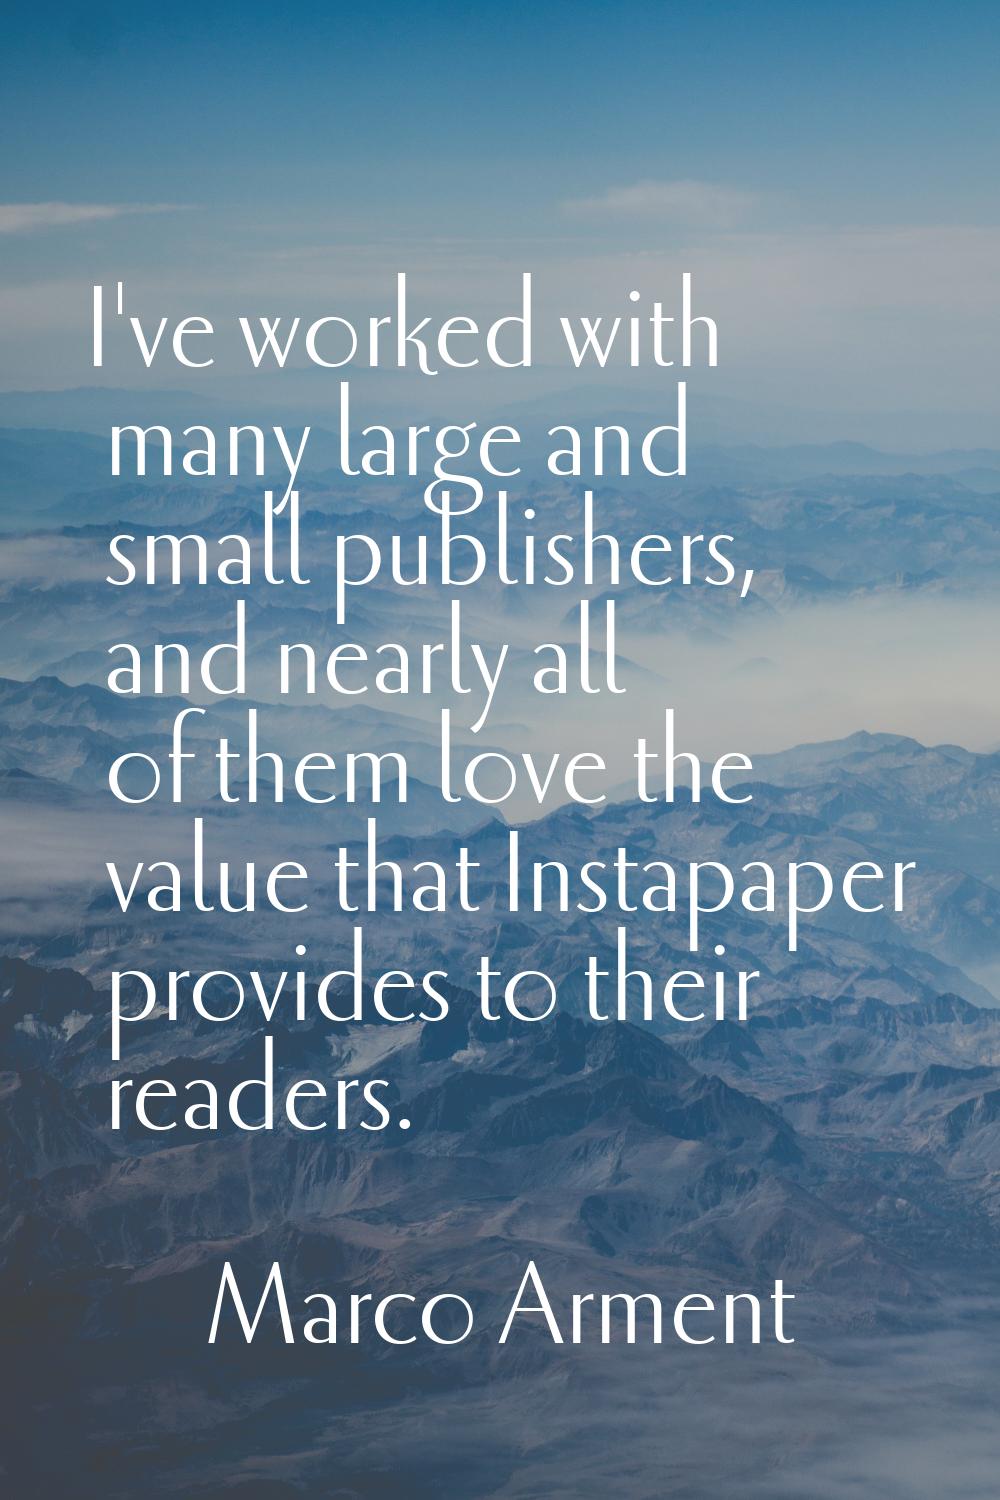 I've worked with many large and small publishers, and nearly all of them love the value that Instap